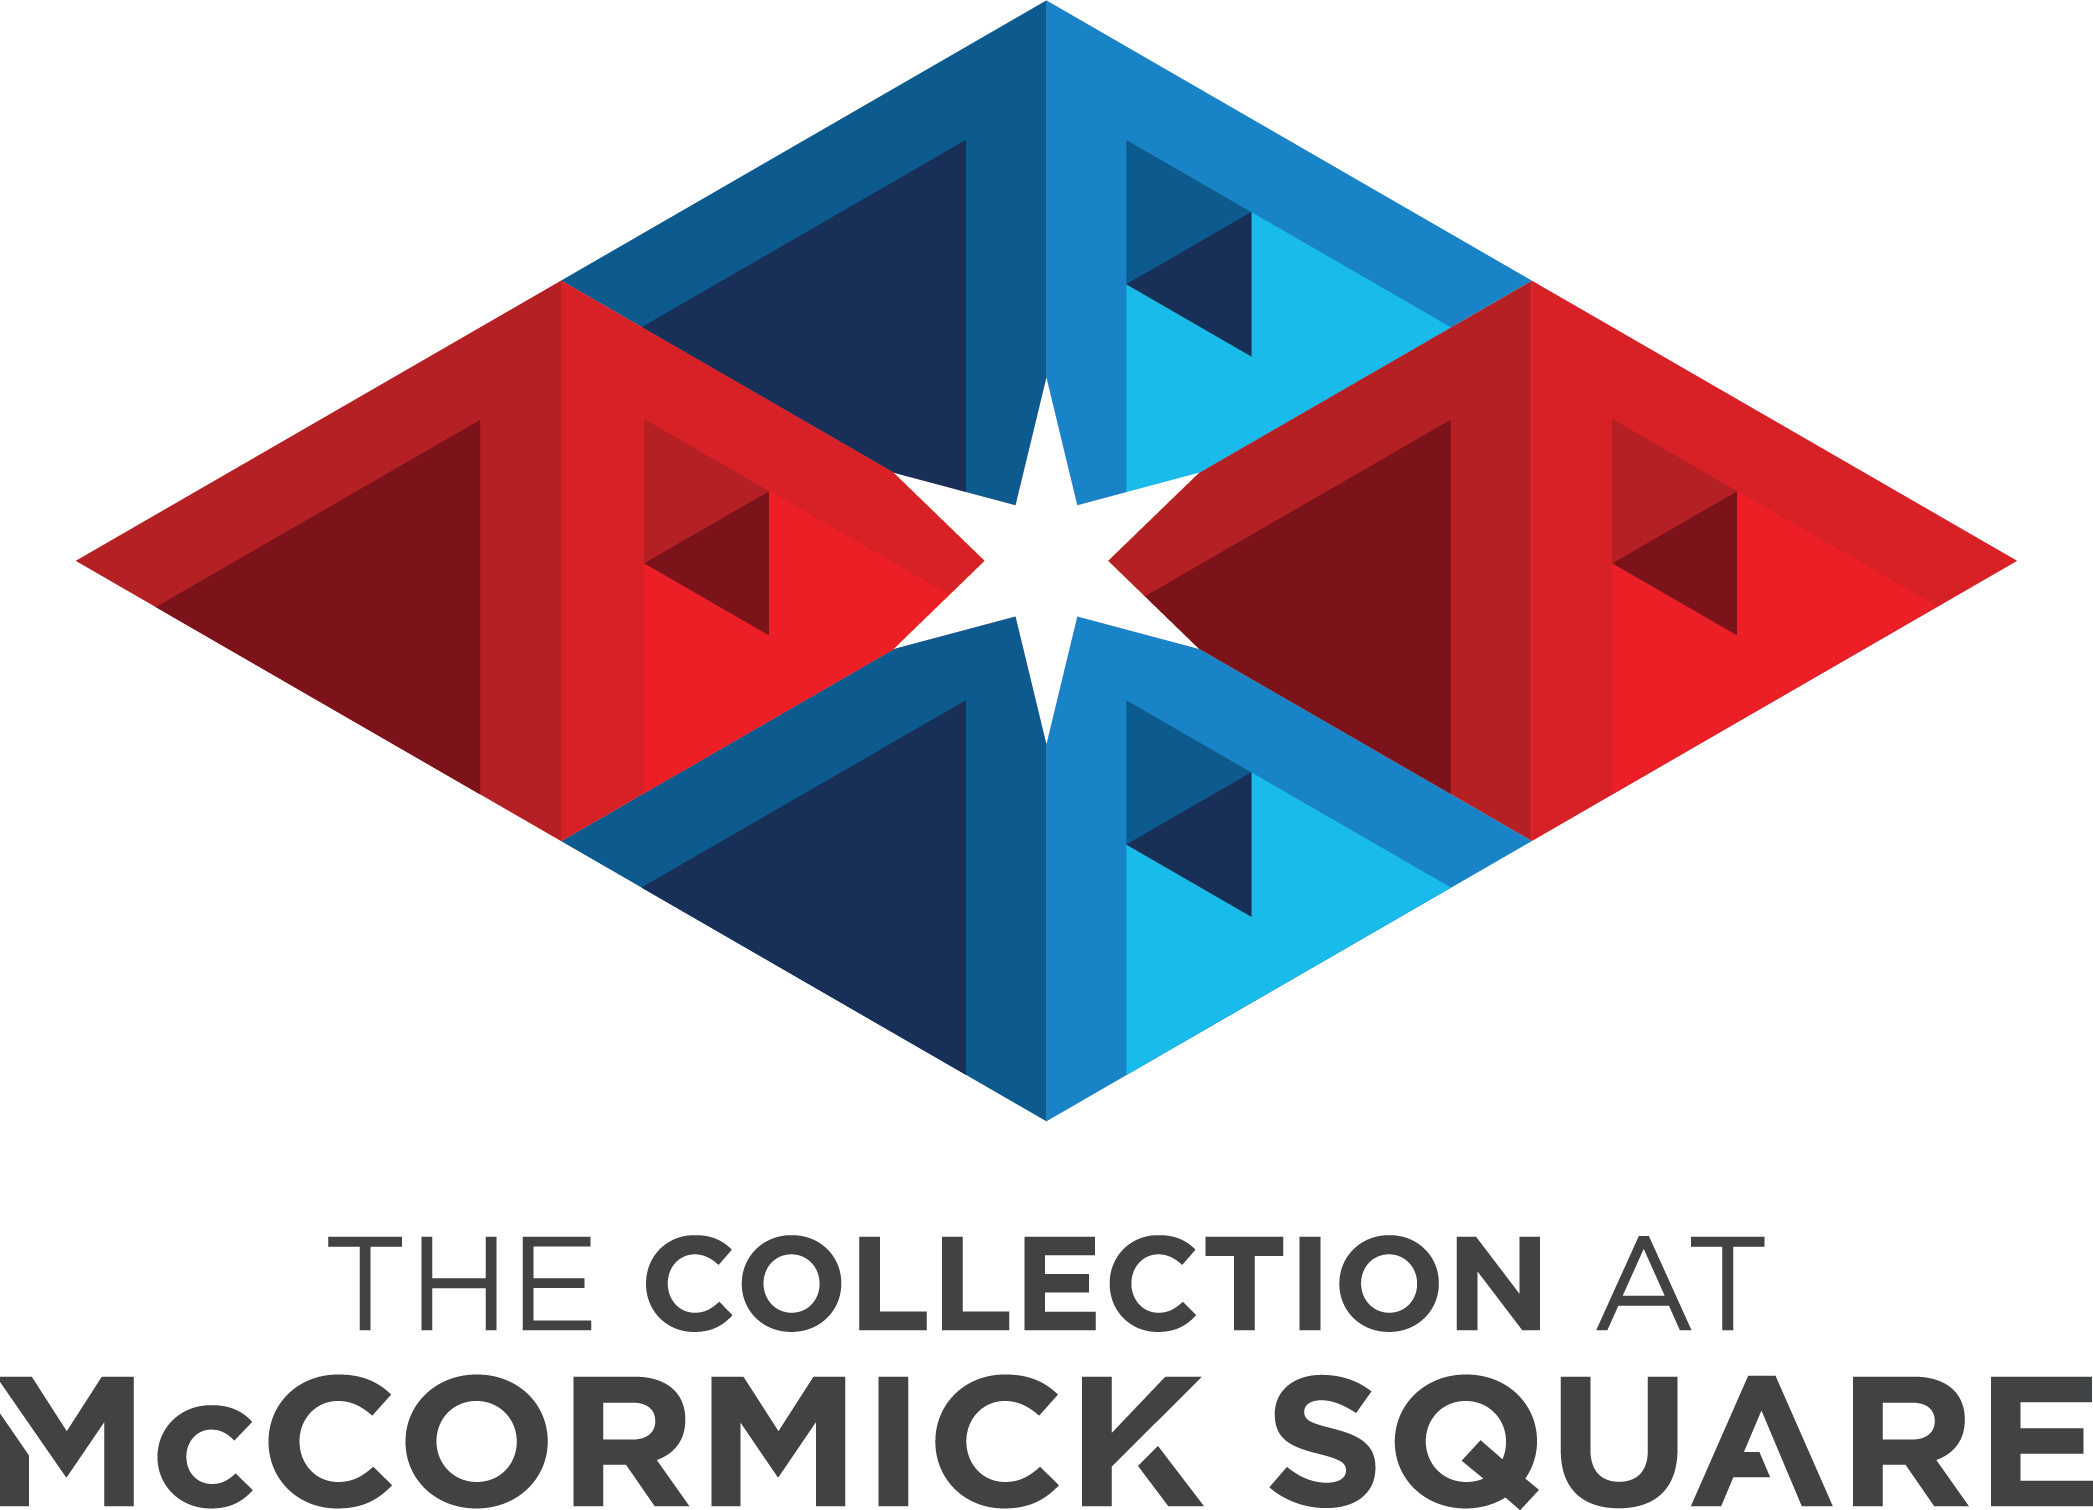 The Collection at McCormick Square